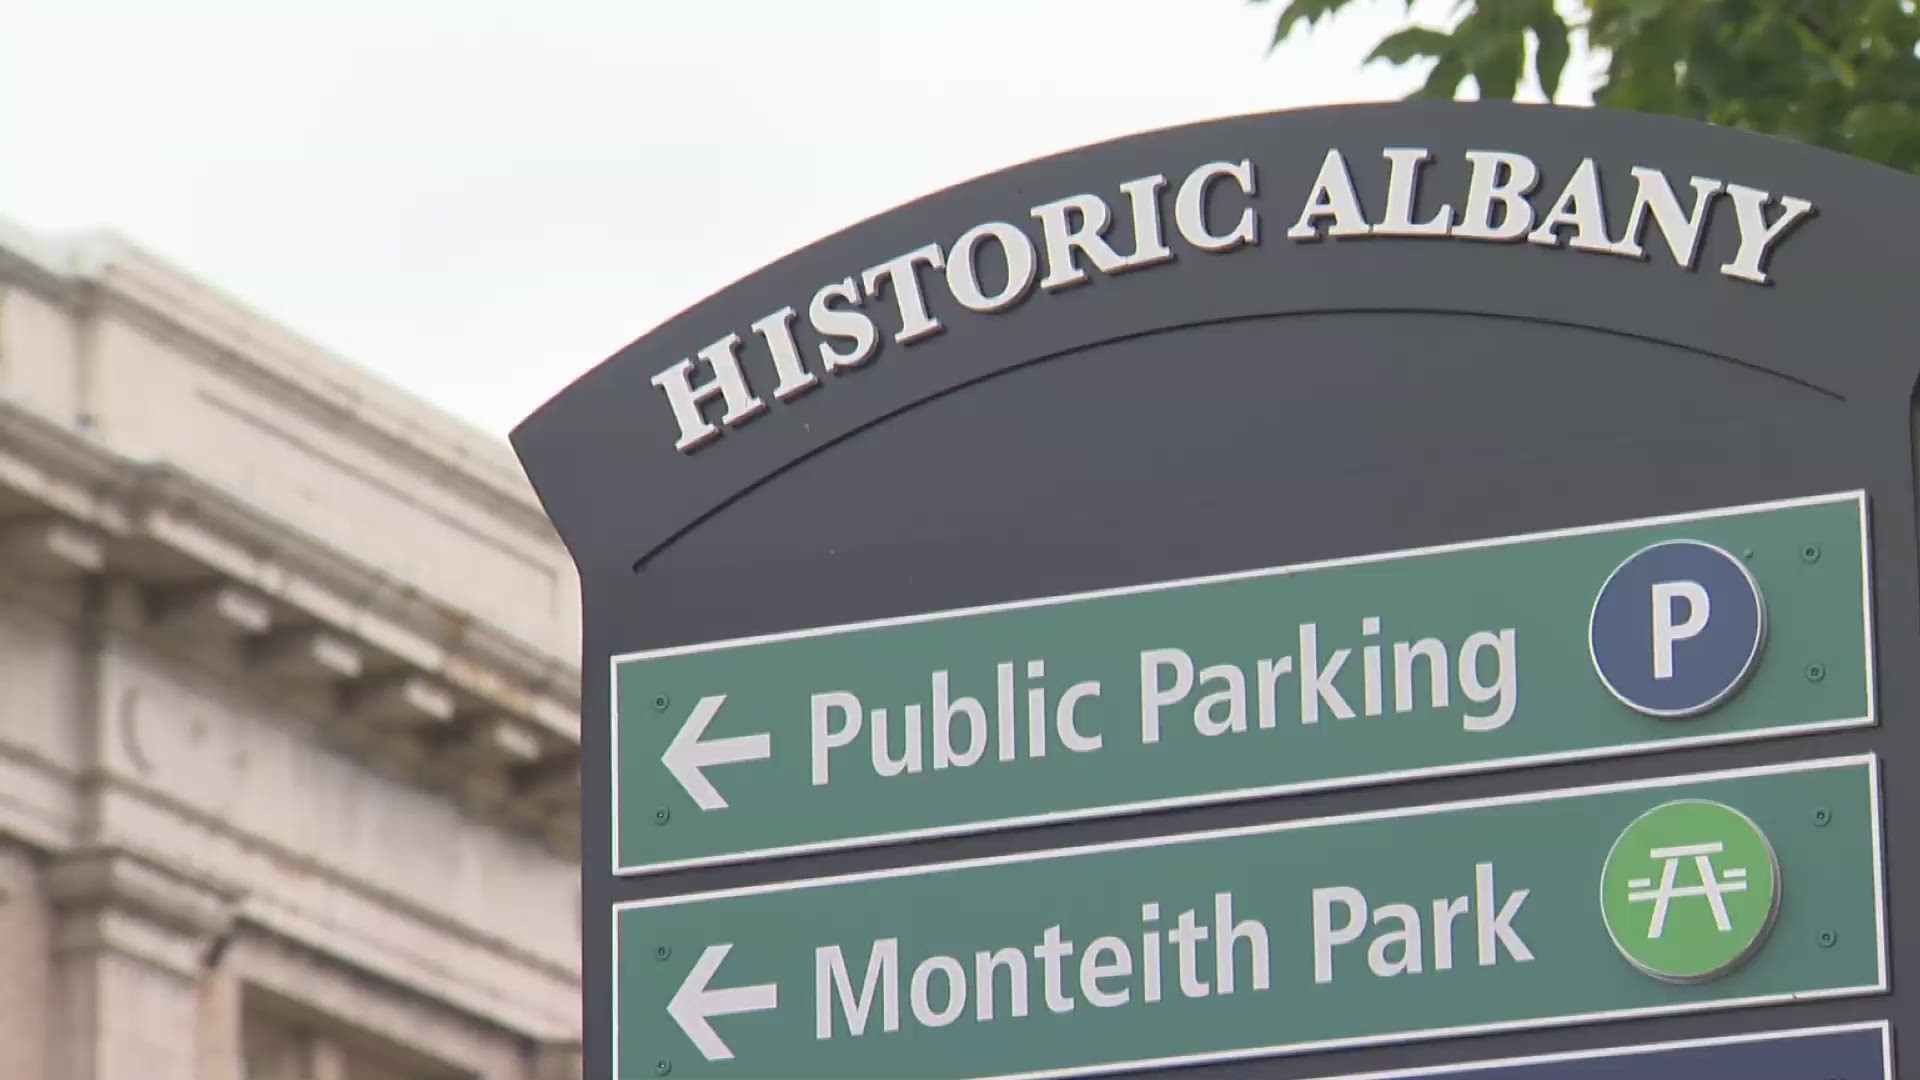 As part of his 'Rod on the Road' series, he went down into the Willamette Valley and visited Albany, taking a walk in its historic downtown and chatting with passersby.